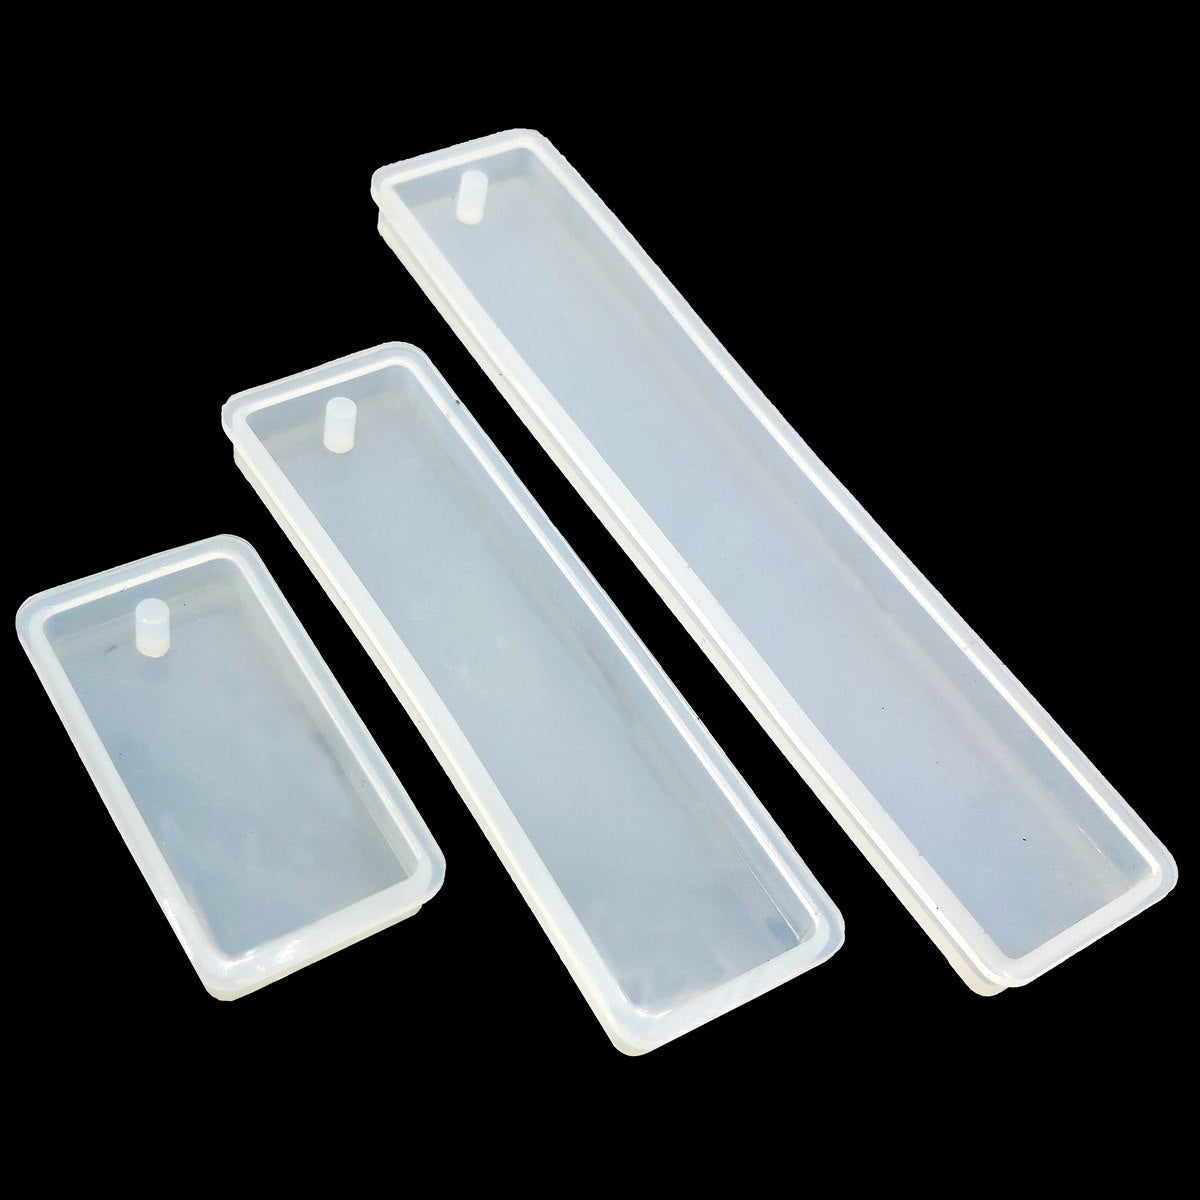 jags-mumbai Mould Silicone mould bookmarks 2 4 6 inch 3Pc Set